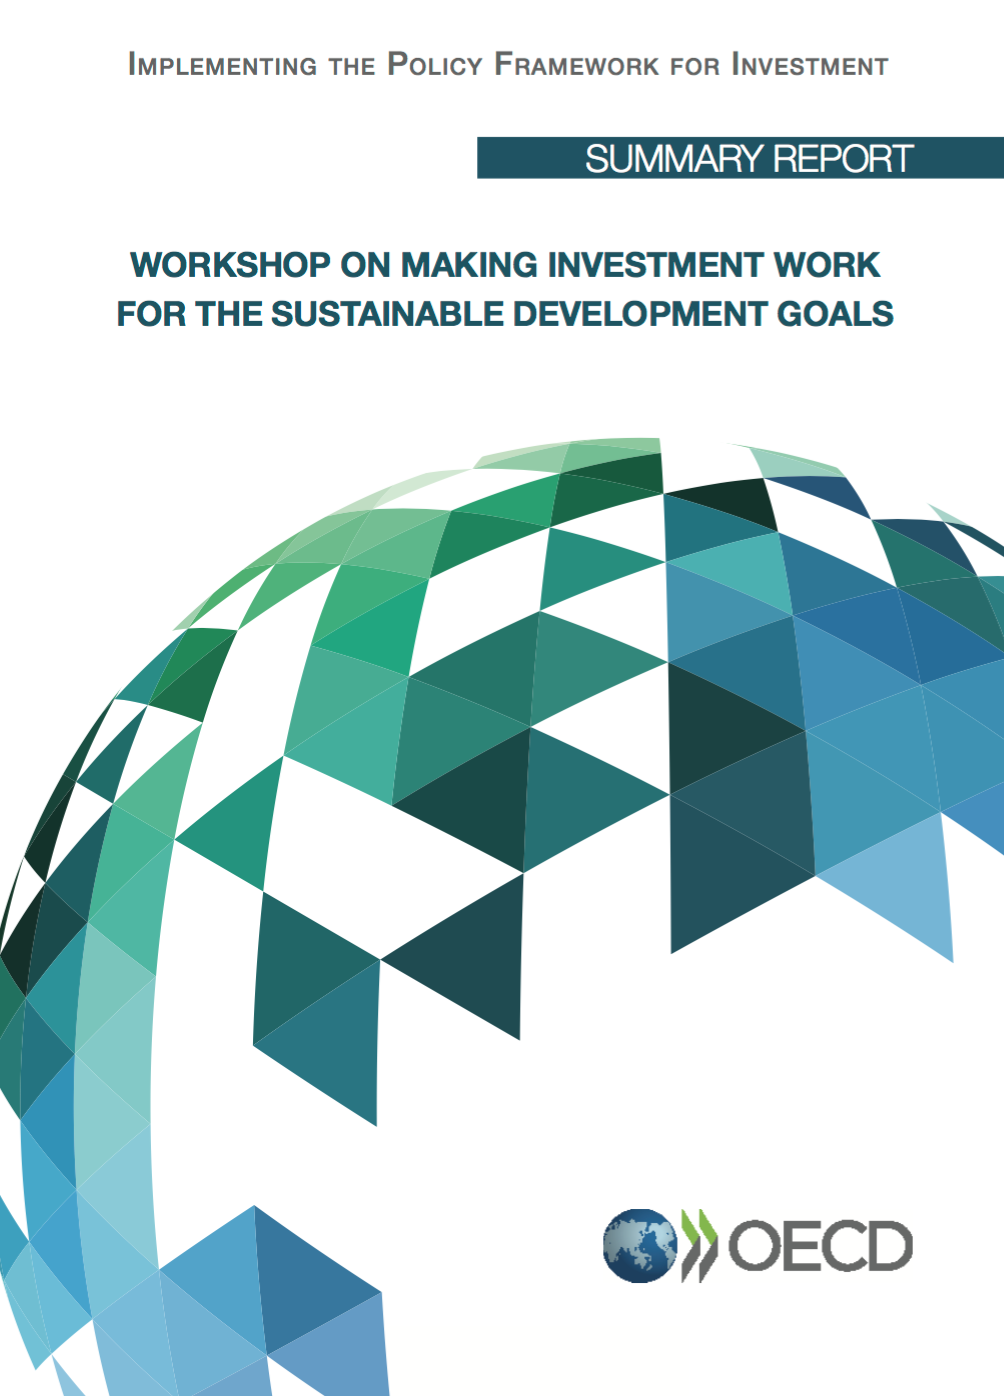 Workshop on making Investment work for the SDGs